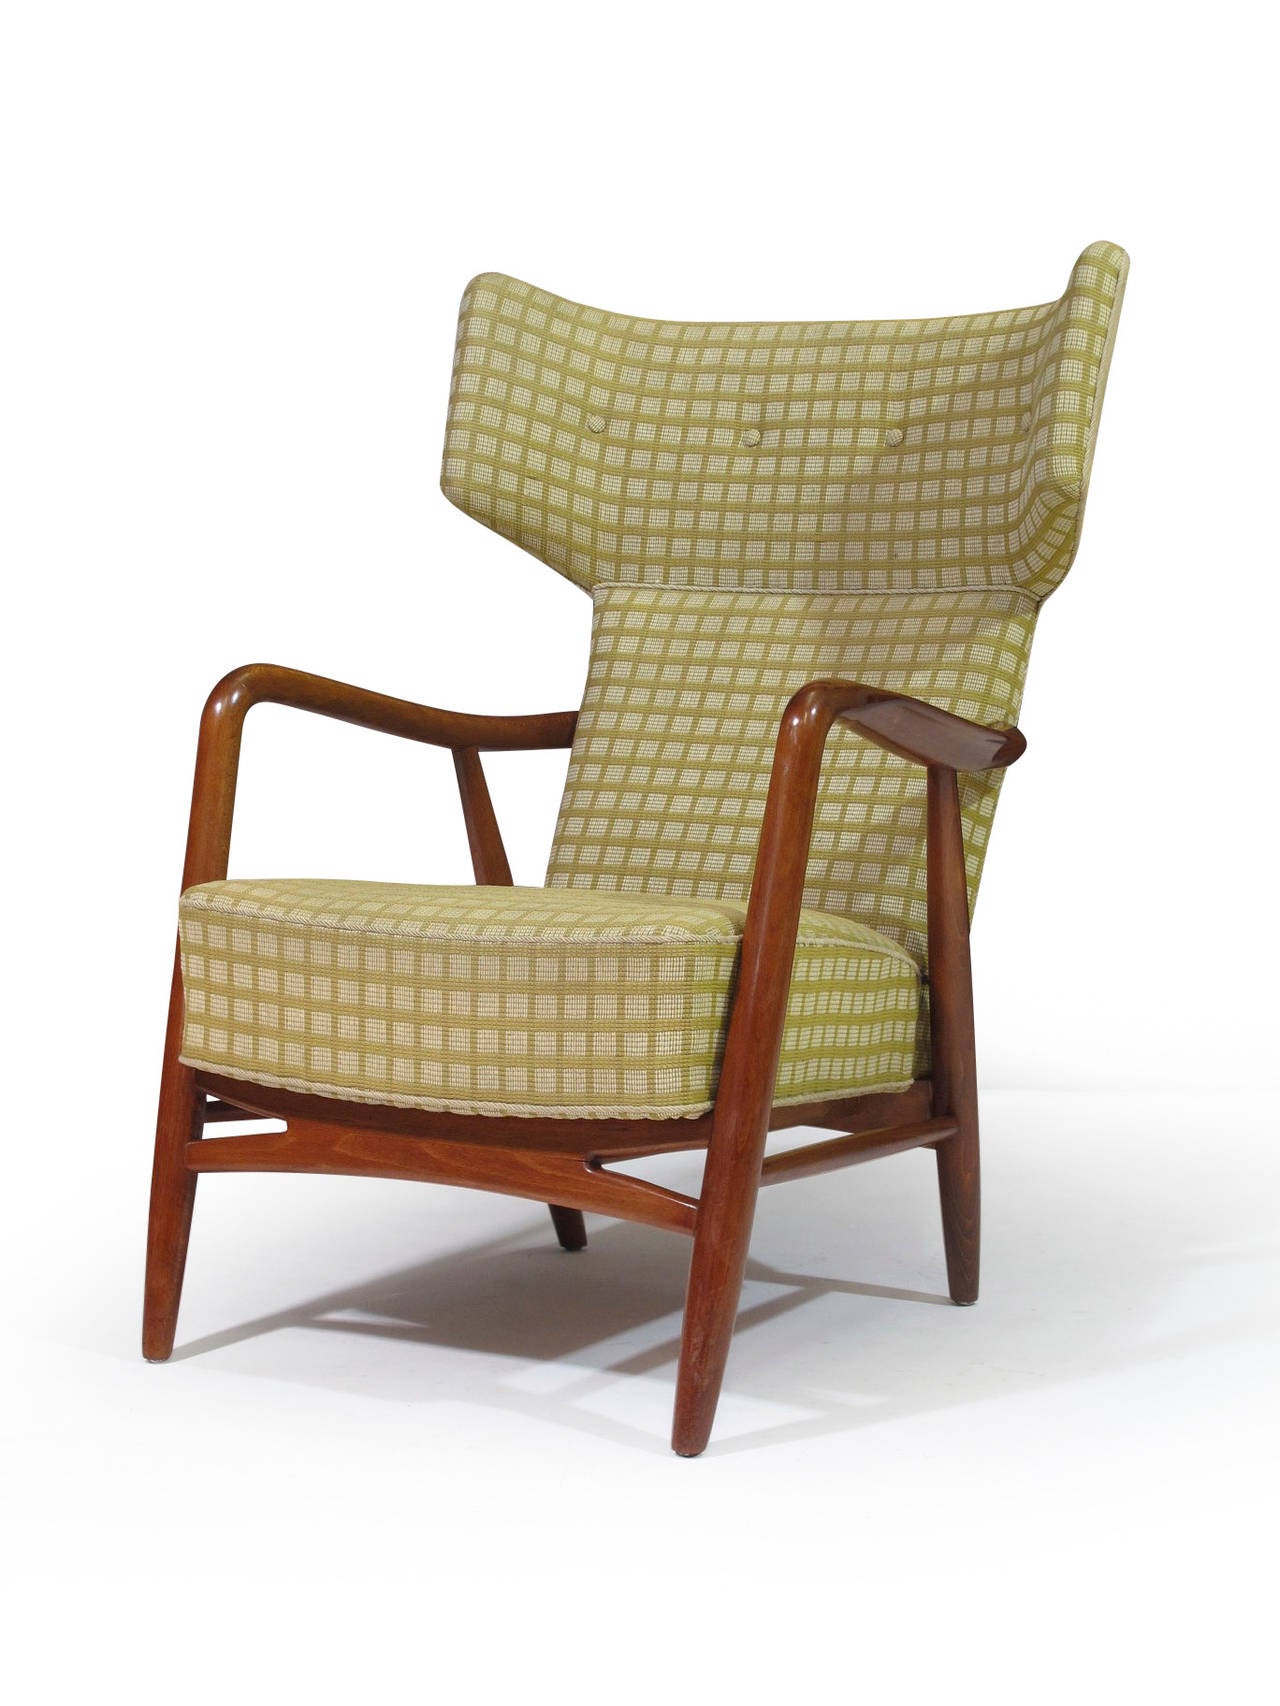 Stained Nils & Eva Koppel Danish Wingback Chair